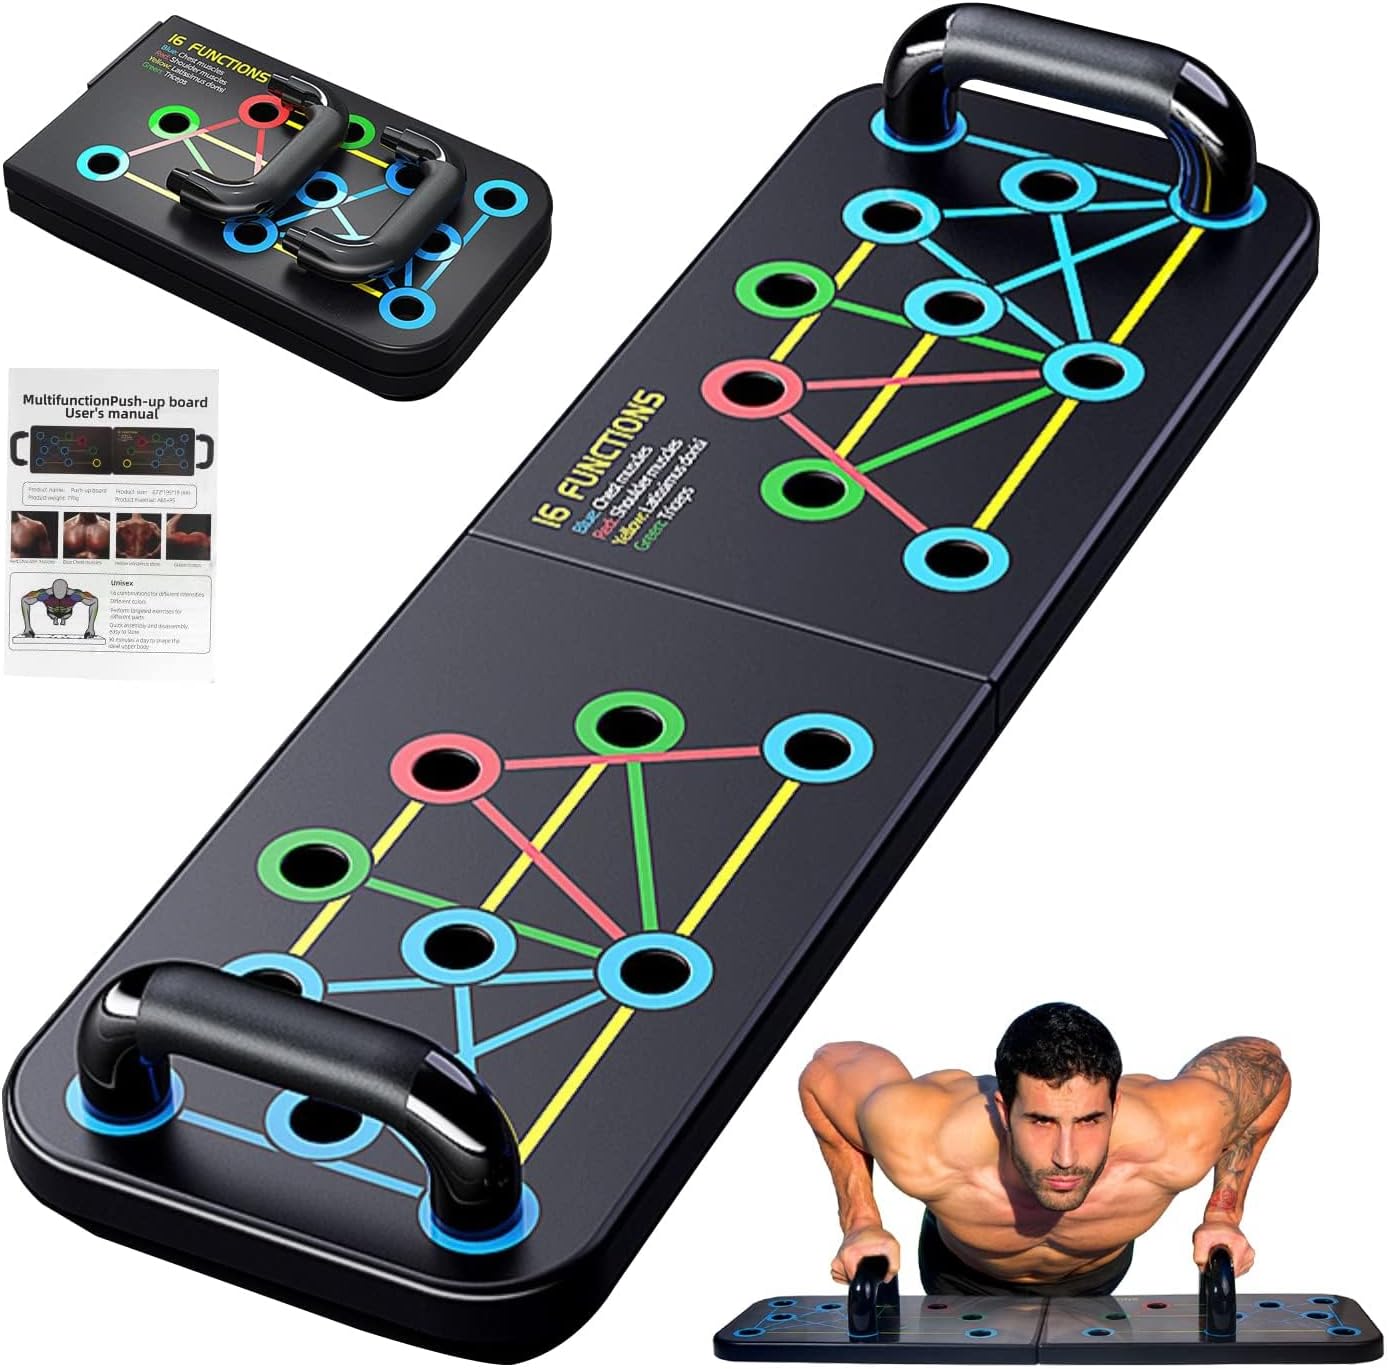 Push Up Board, SRIEEM Multi-function Detachable Push Up Bar, Portable Push up Handles for FloorPortable Home Gym Workout Equipment for Men and Women